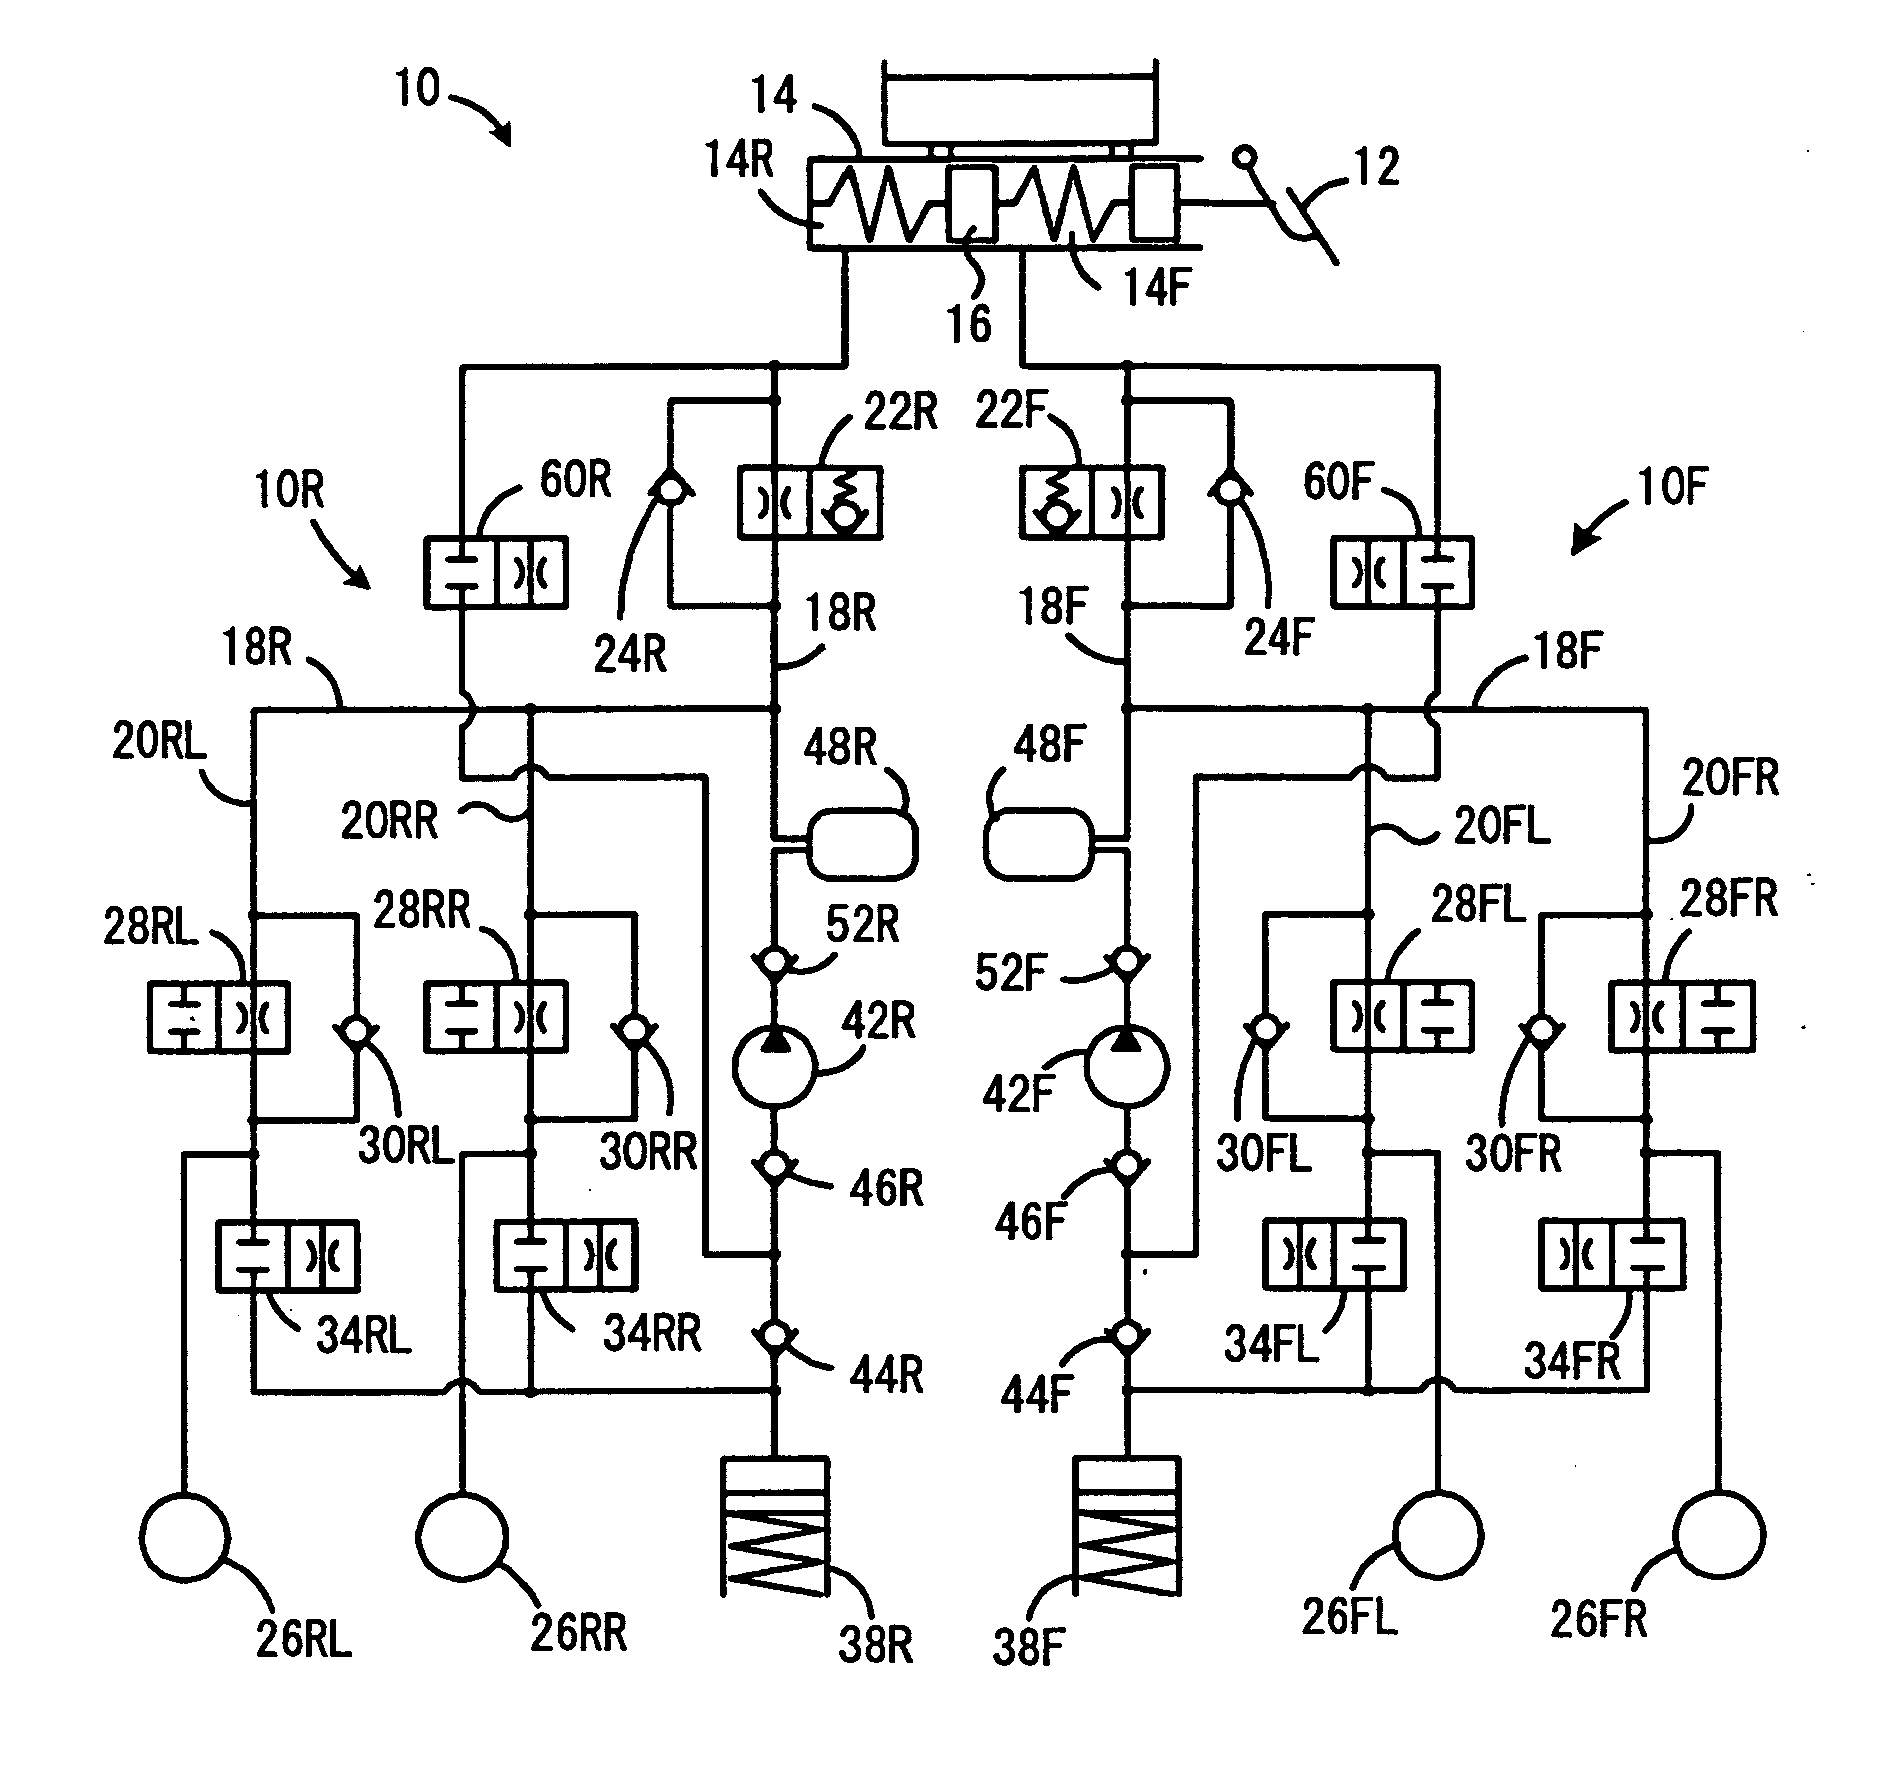 Braking force control system for vehicles